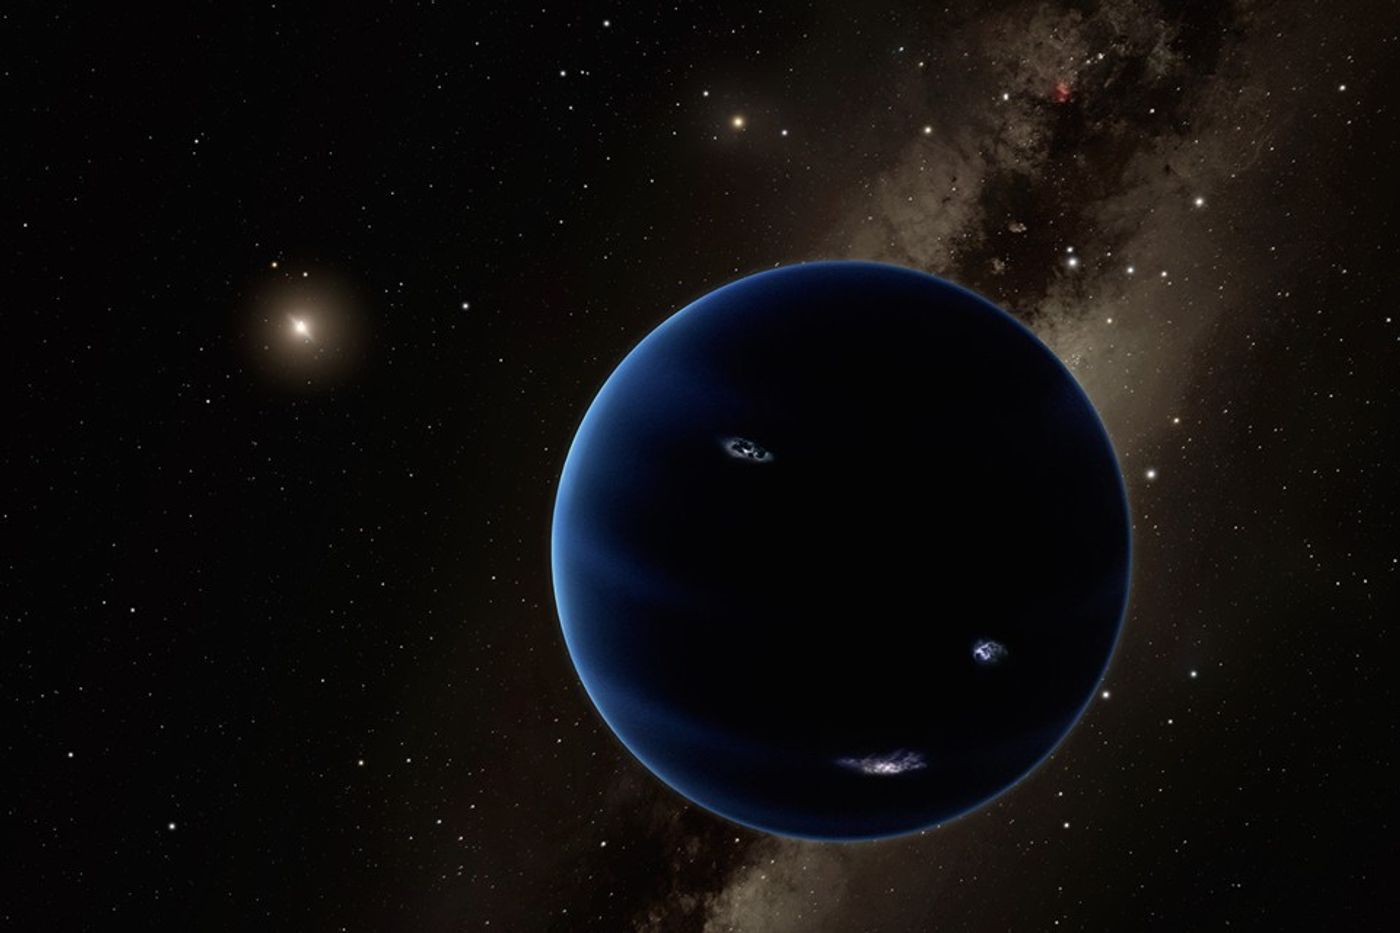 Does Planet Nine exist? Scientists believe our solar system may have captured it from another system 4.5 billion years ago.